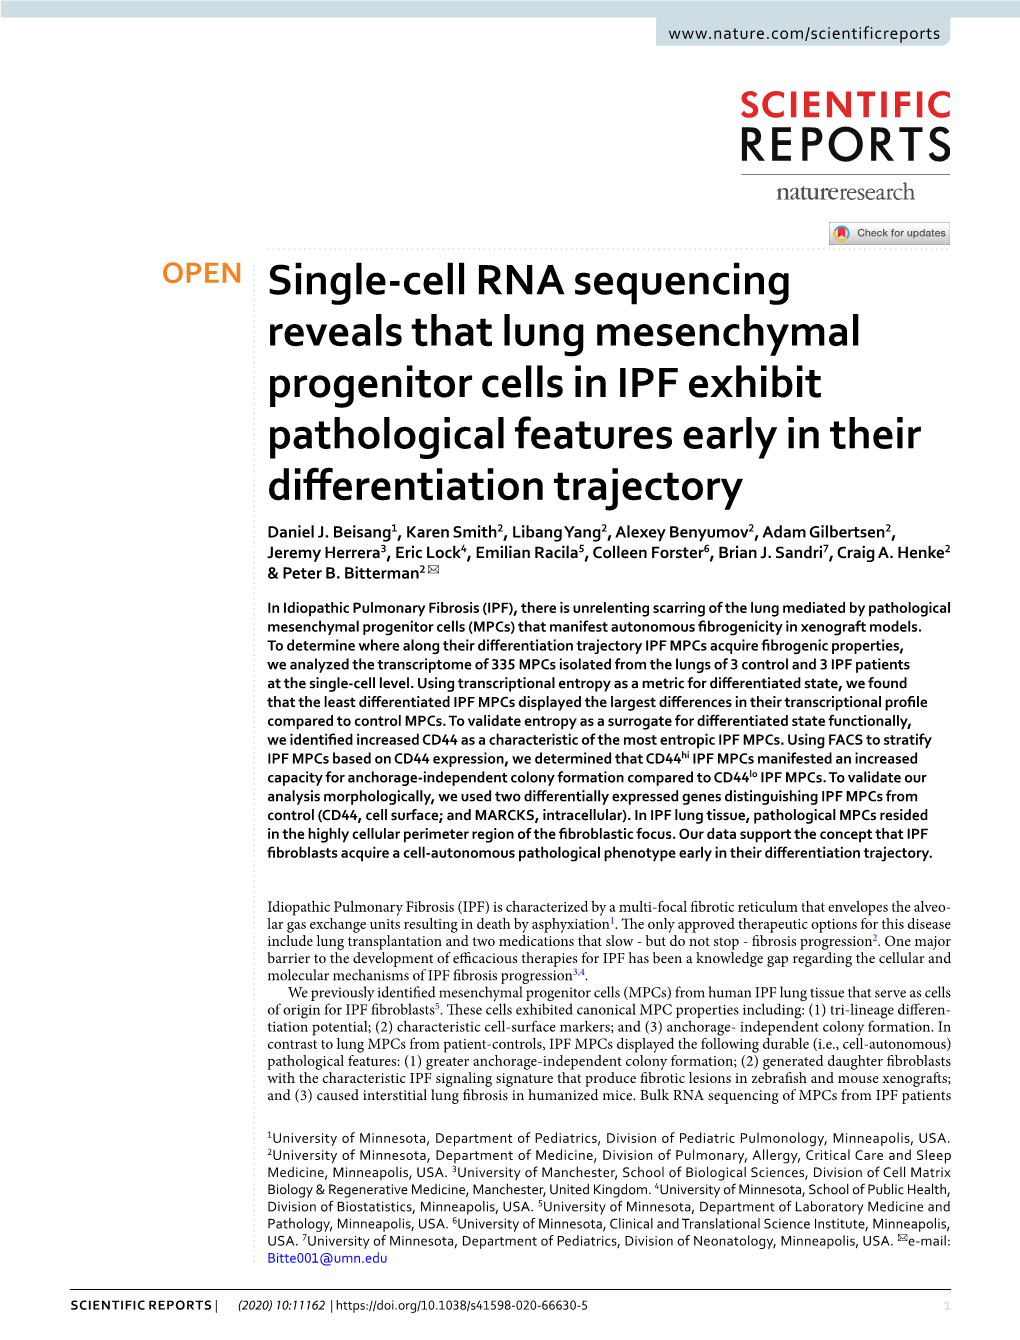 Single-Cell RNA Sequencing Reveals That Lung Mesenchymal Progenitor Cells in IPF Exhibit Pathological Features Early in Their Diferentiation Trajectory Daniel J